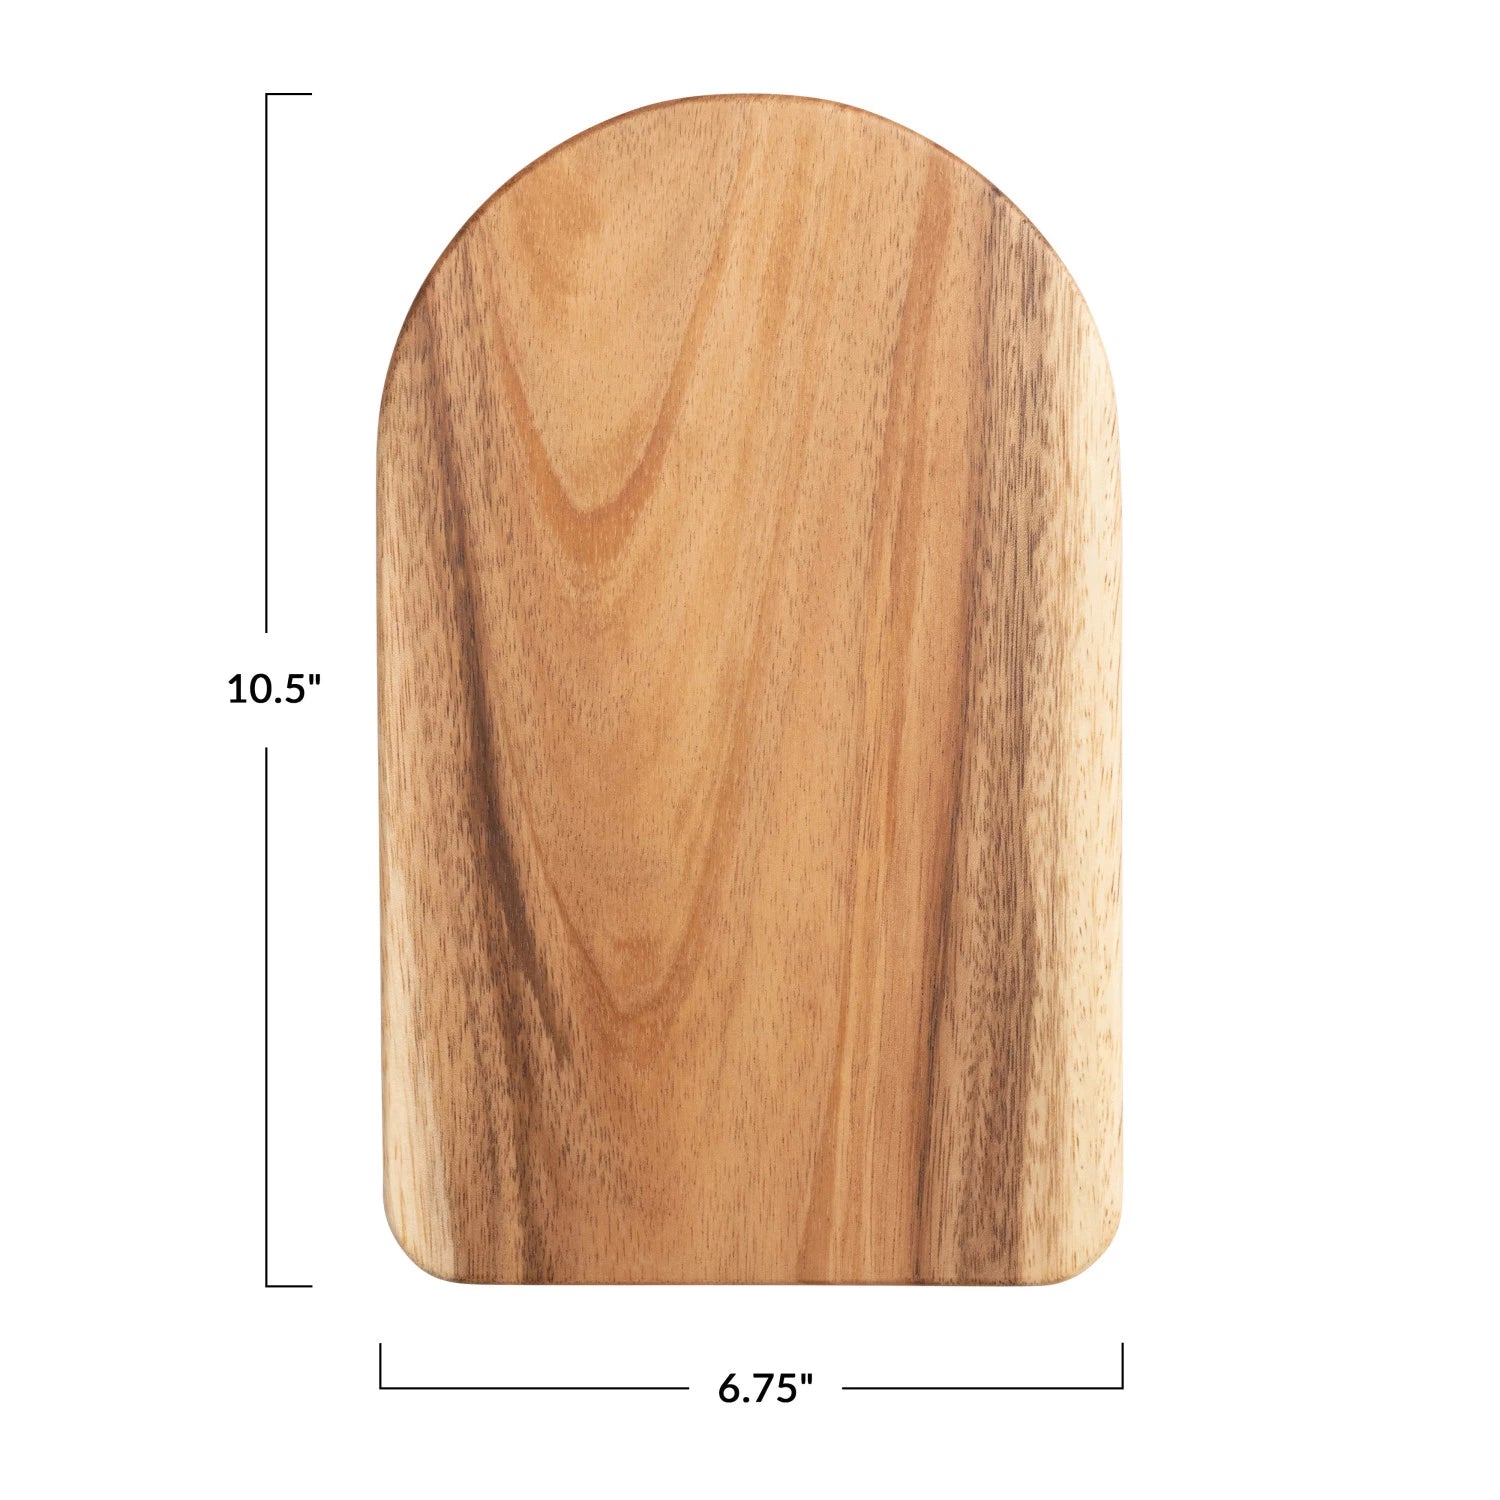 Suar Wood Arched Cheese/Cutting Board